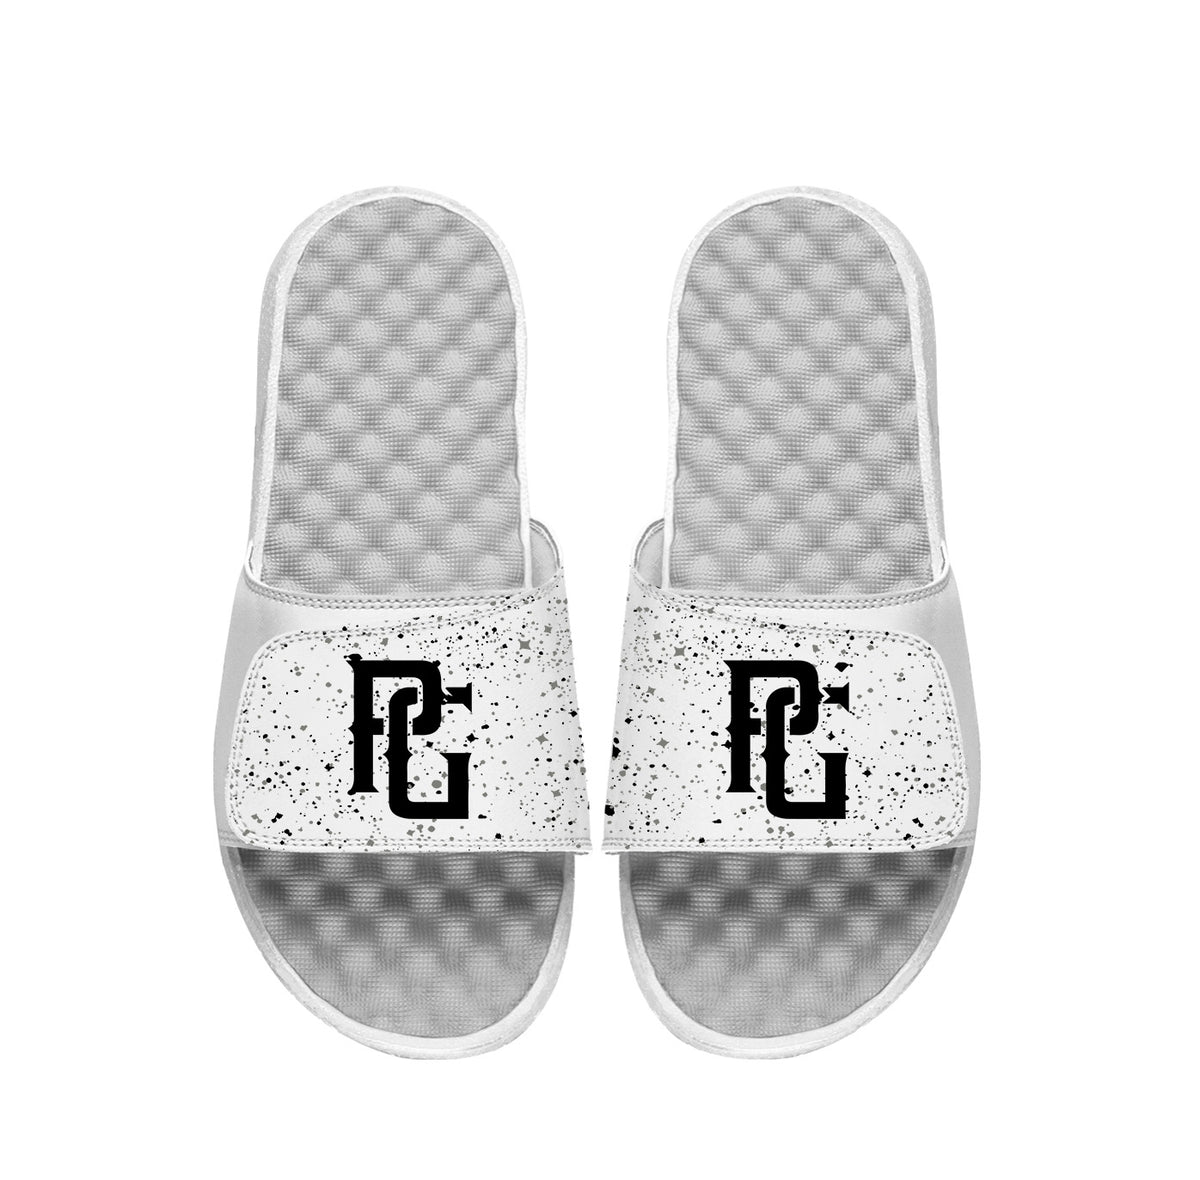 Perfect Game x ISlide Speckle Slide Sandals– Perfect Game Apparel